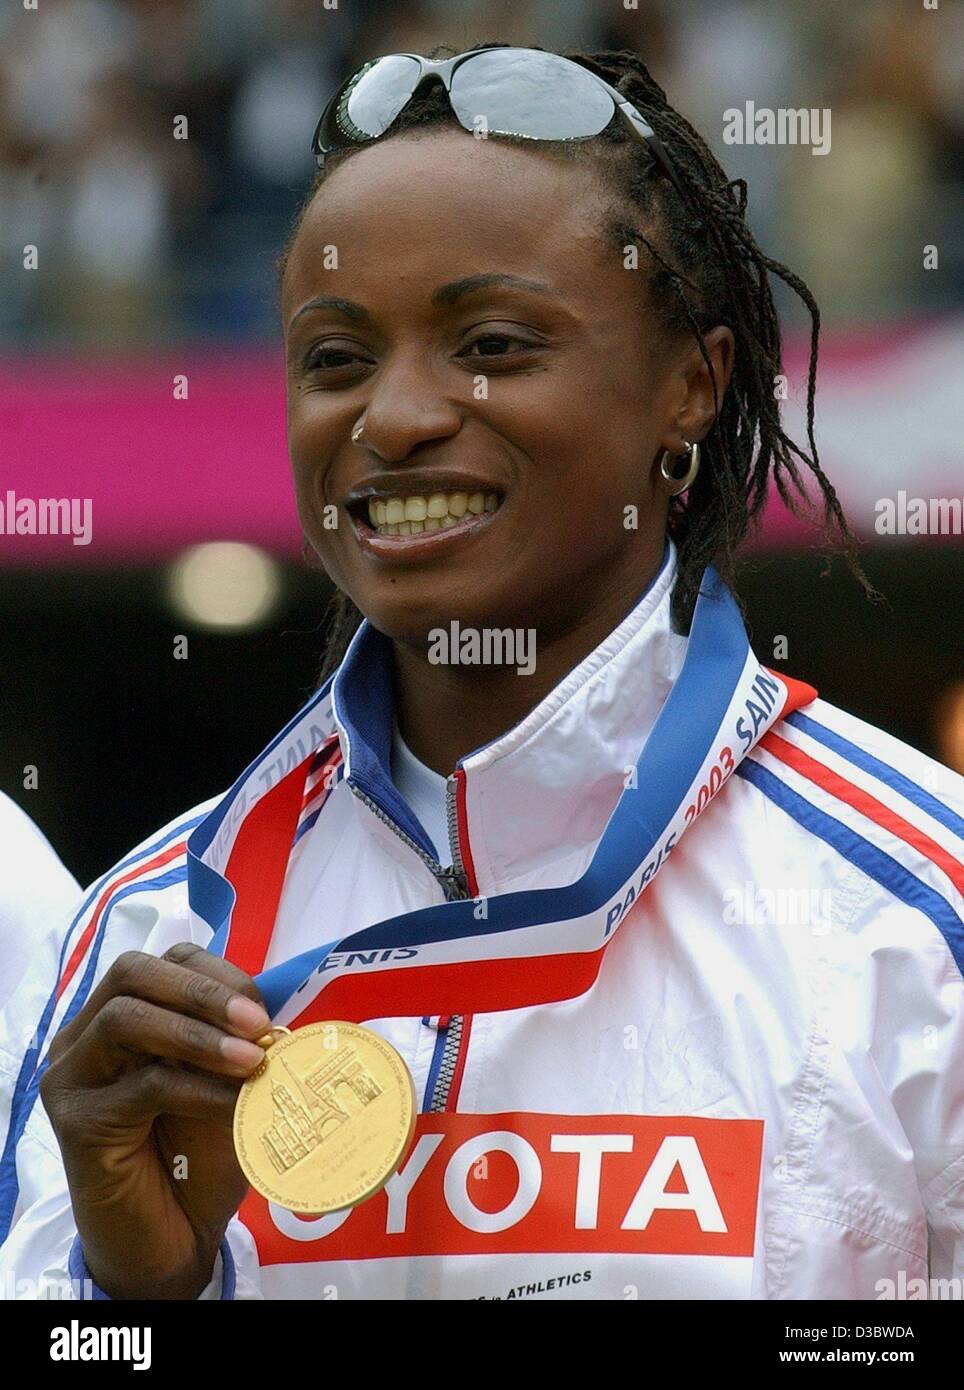 (dpa) - French athlete Eunice Barber poses with the gold medal which she had won at the women's long jump competition of the 9th IAAF Athletic World Championships at the Stade de France in Paris, 31 August 2003. She wins gold with a jump of 6.99 m. Stock Photo